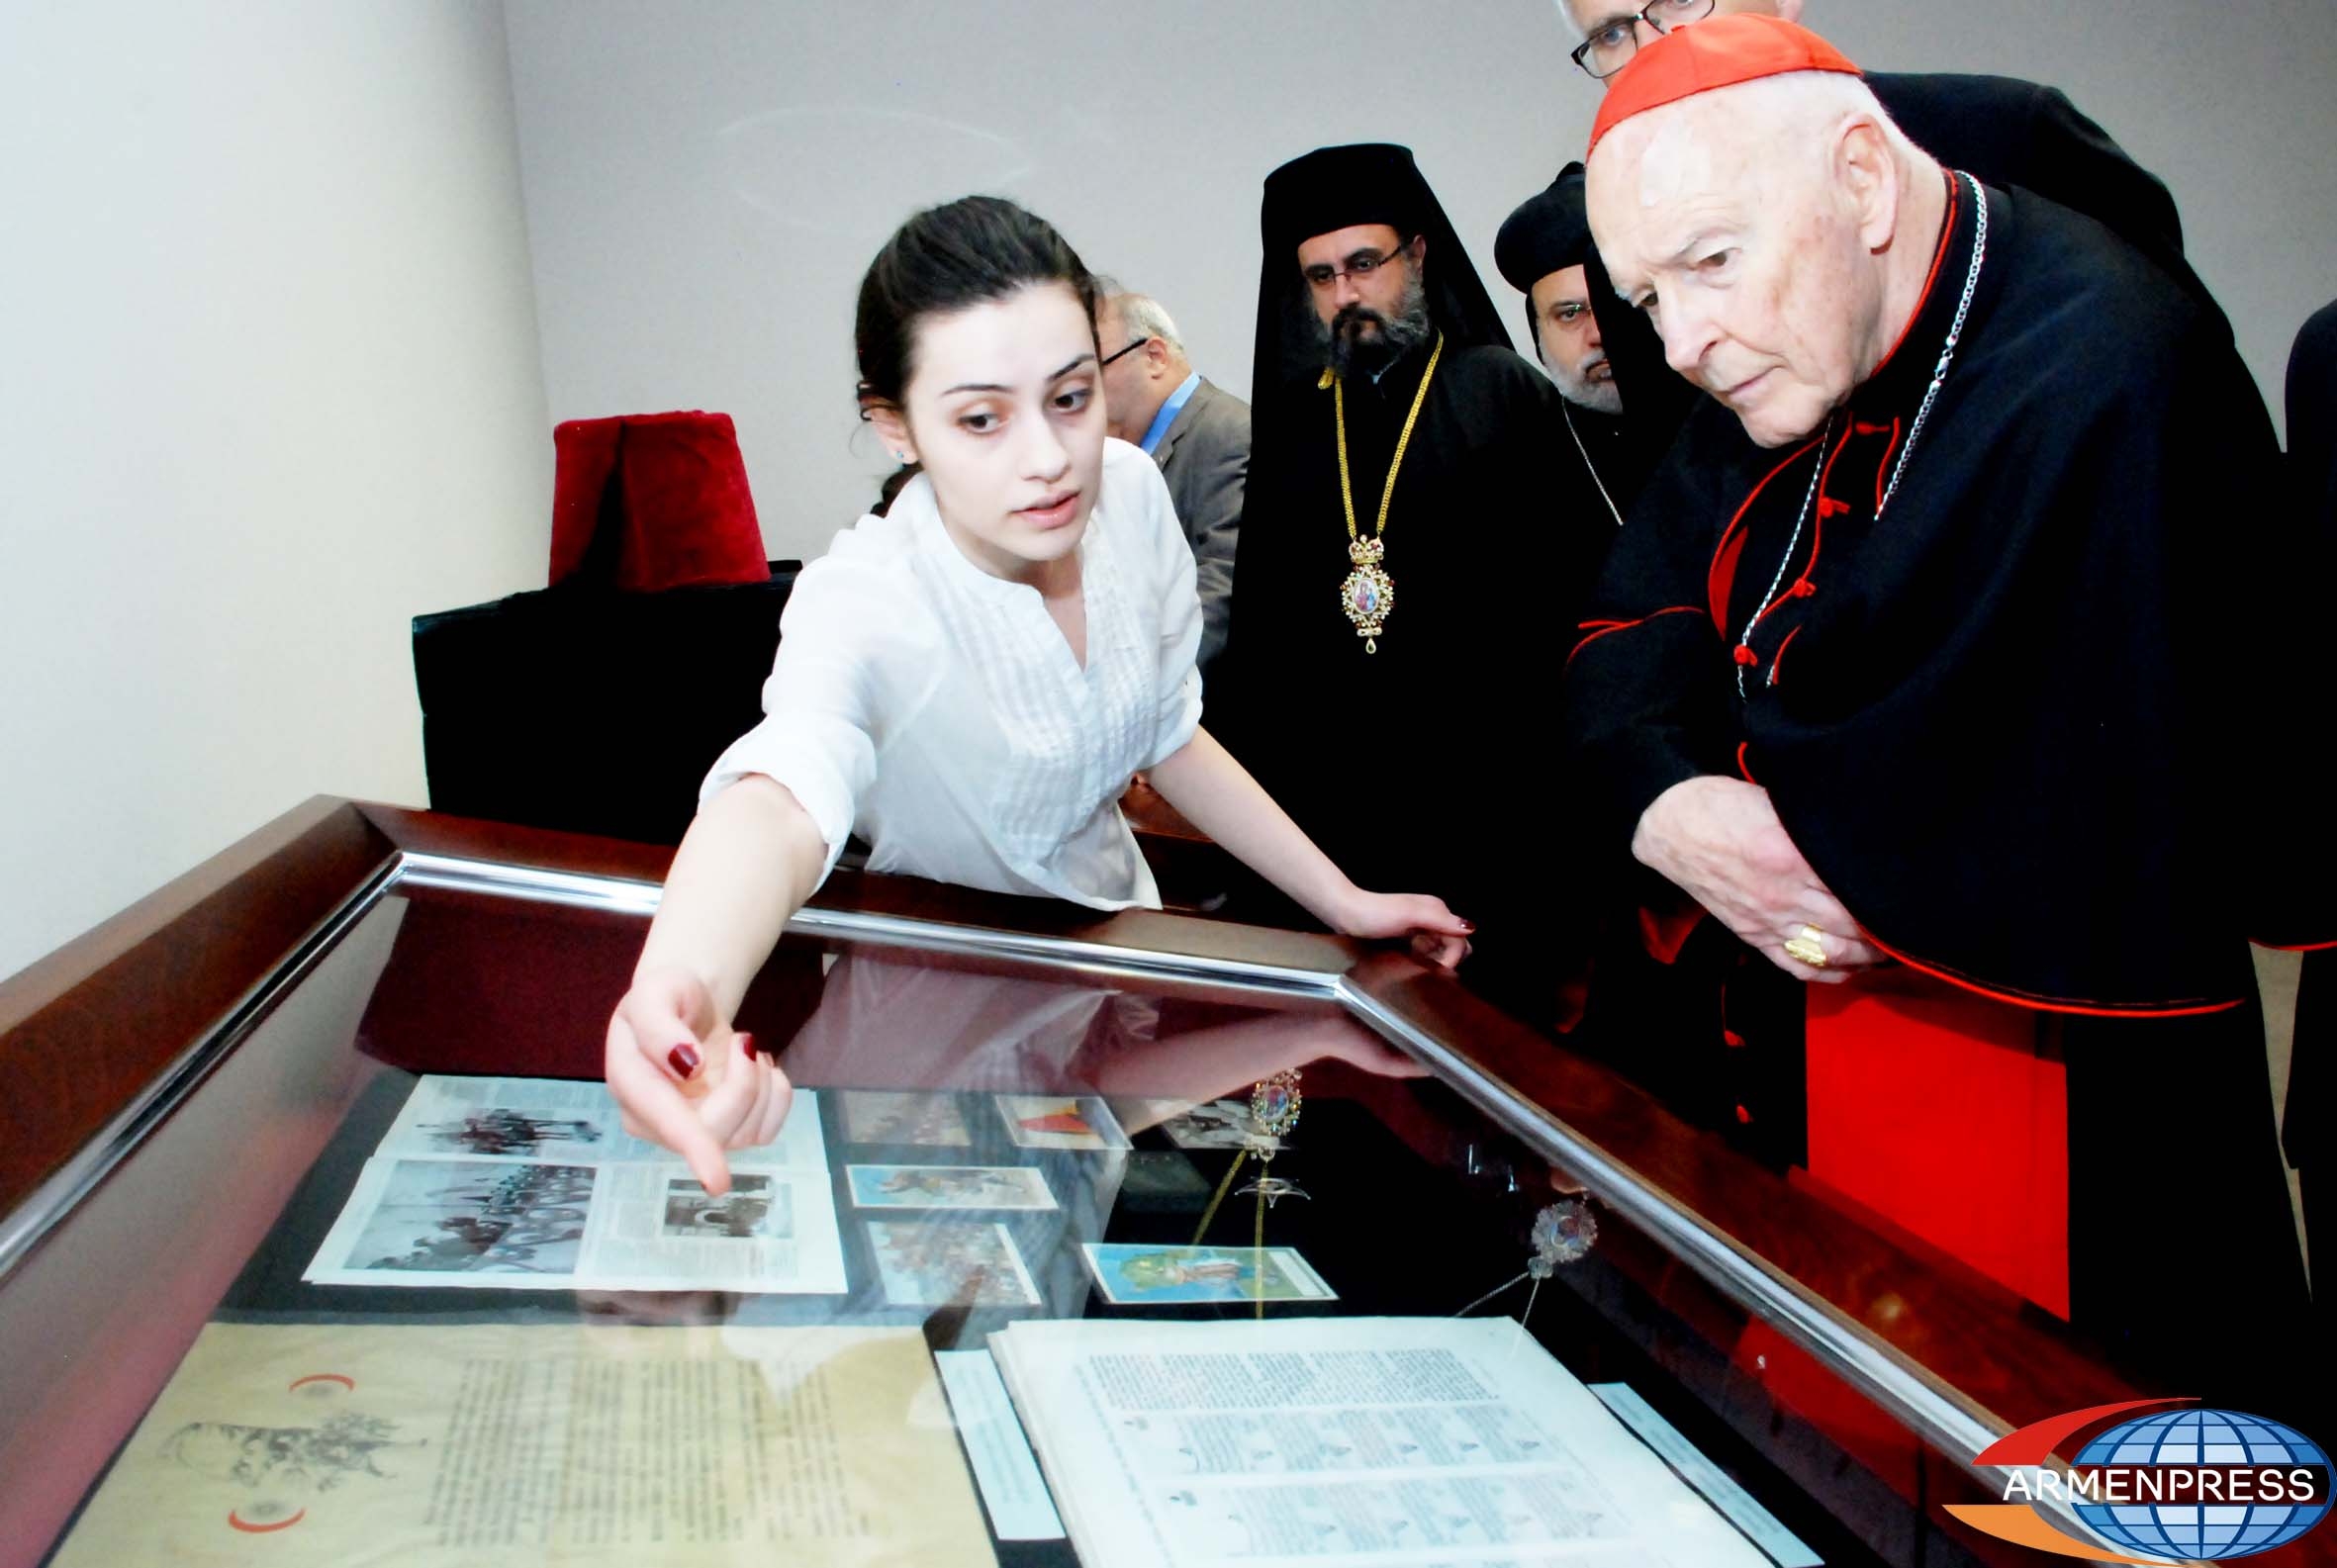 Cardinal was interested in Pope Benedict XV letter urging to stop Armenian Genocide